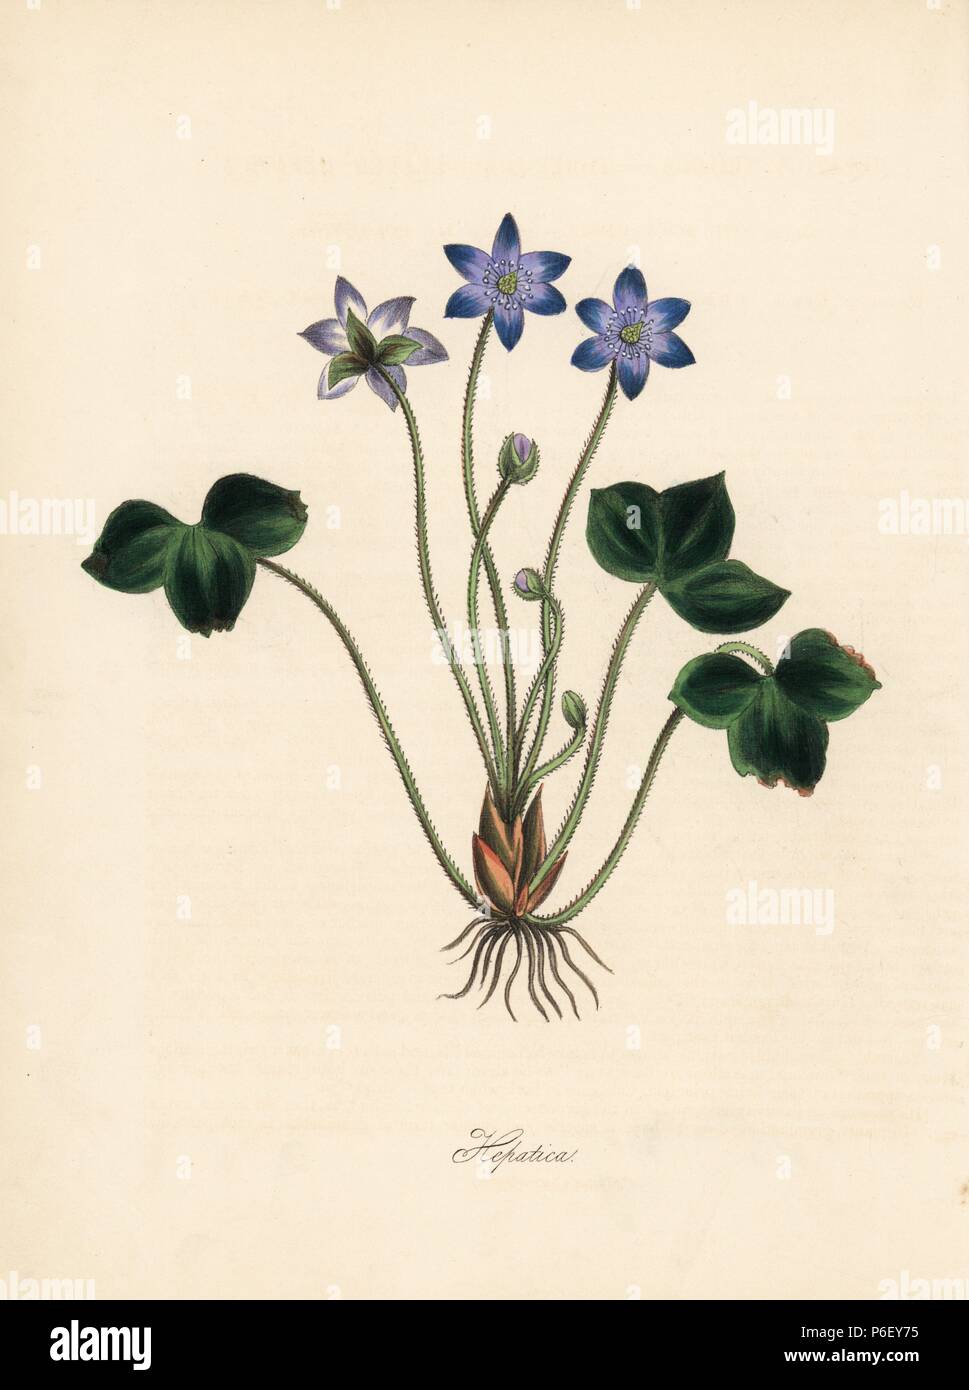 Common hepatica, Anemone hepatica (Three-lobed-leaved hepatica, Hepatica triloba). Handcoloured zincograph by C. Chabot drawn by Miss M. A. Burnett from her 'Plantae Utiliores: or Illustrations of Useful Plants,' Whittaker, London, 1842. Miss Burnett drew the botanical illustrations, but the text was chiefly by her late brother, British botanist Gilbert Thomas Burnett (1800-1835). Stock Photo